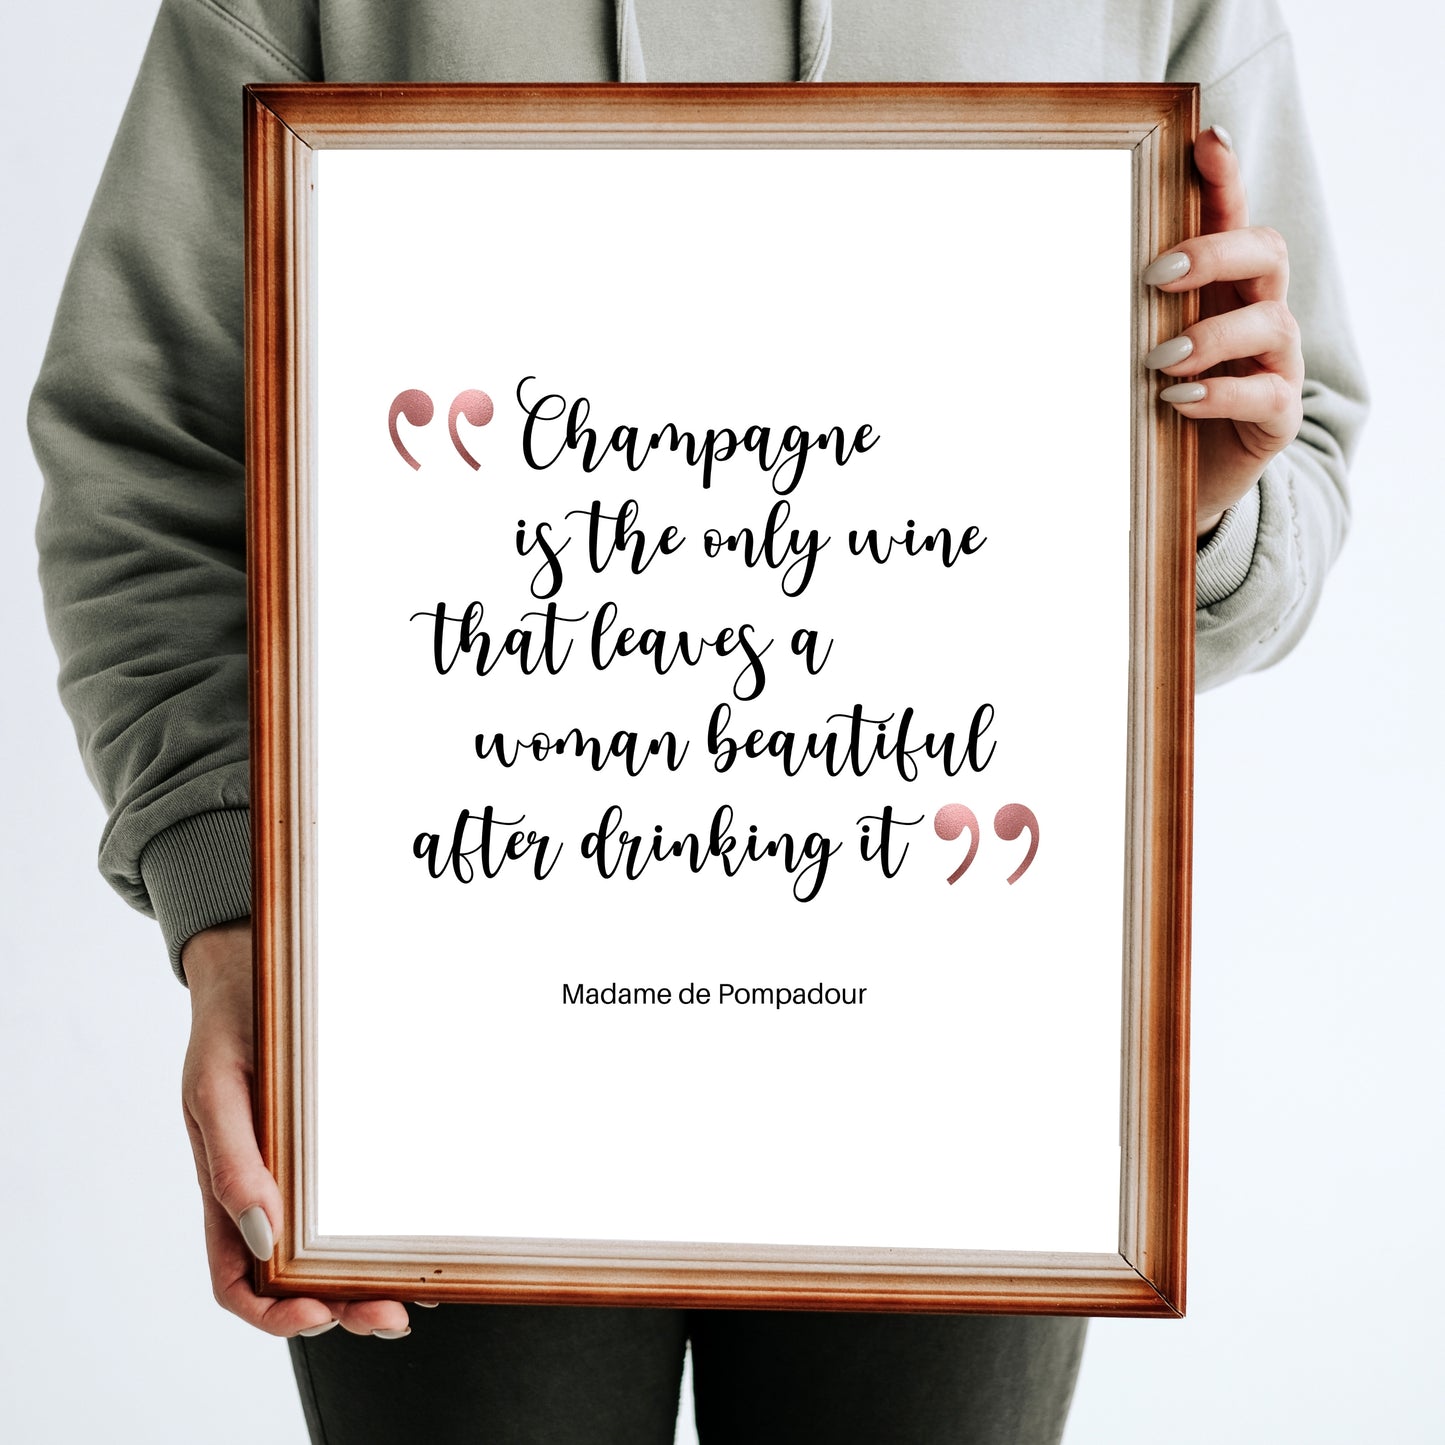 Champagne Quote By Madame de Pompadour With Rose Gold Accents, Printable Art